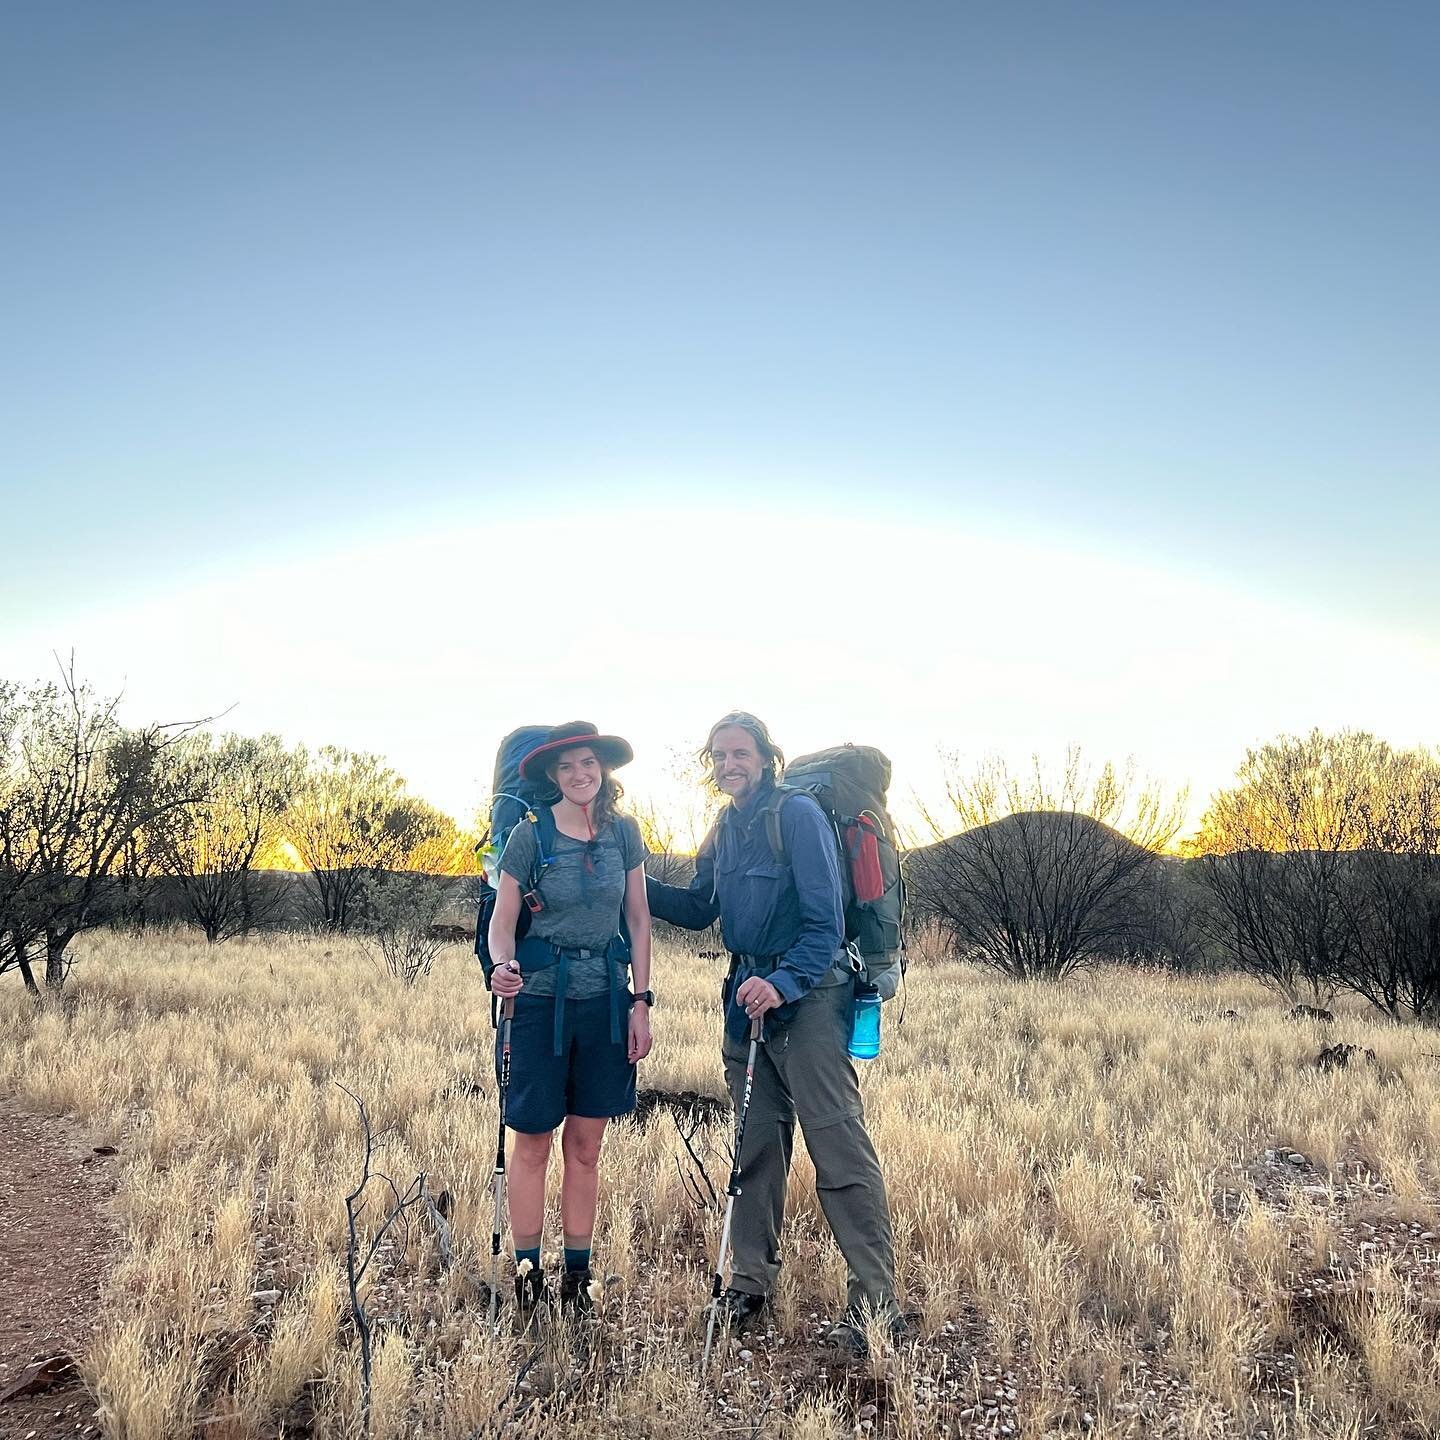 #larapintatrail #alicesprings to #mtsonder 14days 230km hike with @mirandarosescott wonderful adventure, quiet challenging at times but incredible to be in the #westmacdonnellranges. Lovely to see the flora,the mountains ranges, gouge&rsquo;s, waterh